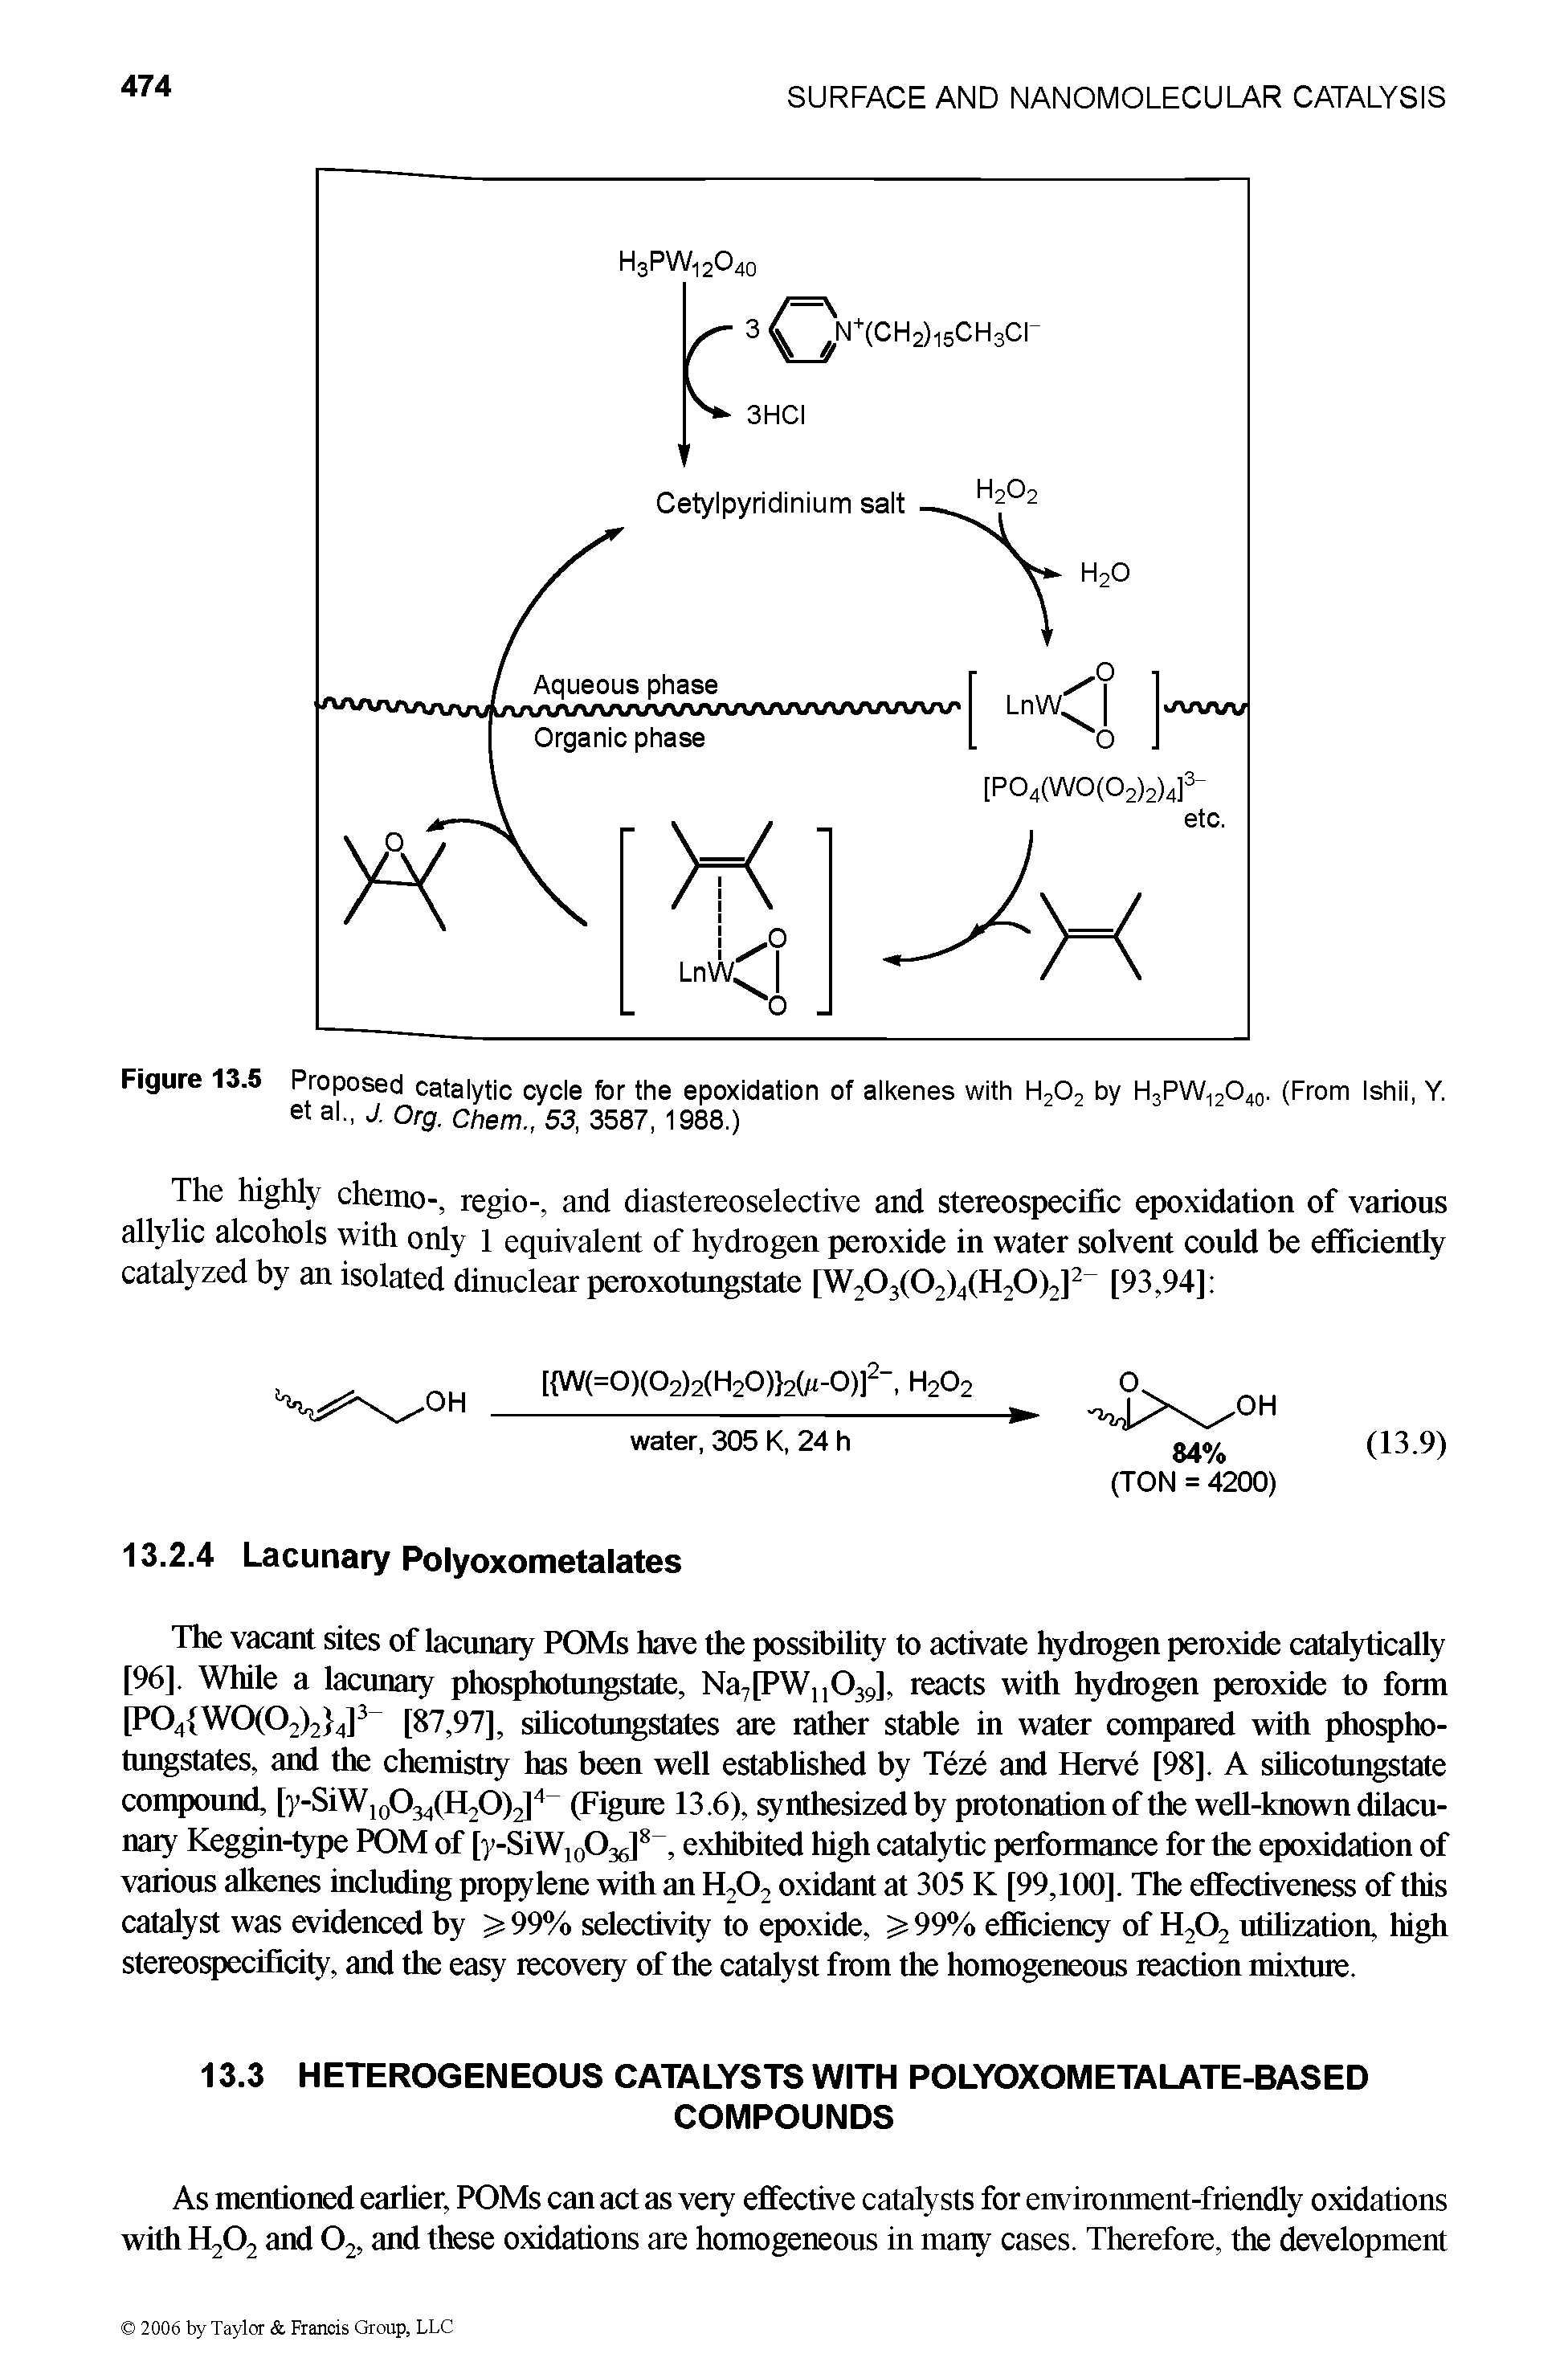 Figure 13.5 Proposed catalytic cycle for the epoxidation of alkenes with H202 by H3PW12O40. (From Ishii, Y. et al J. Org. Chem., 53, 3587, 1988.)...